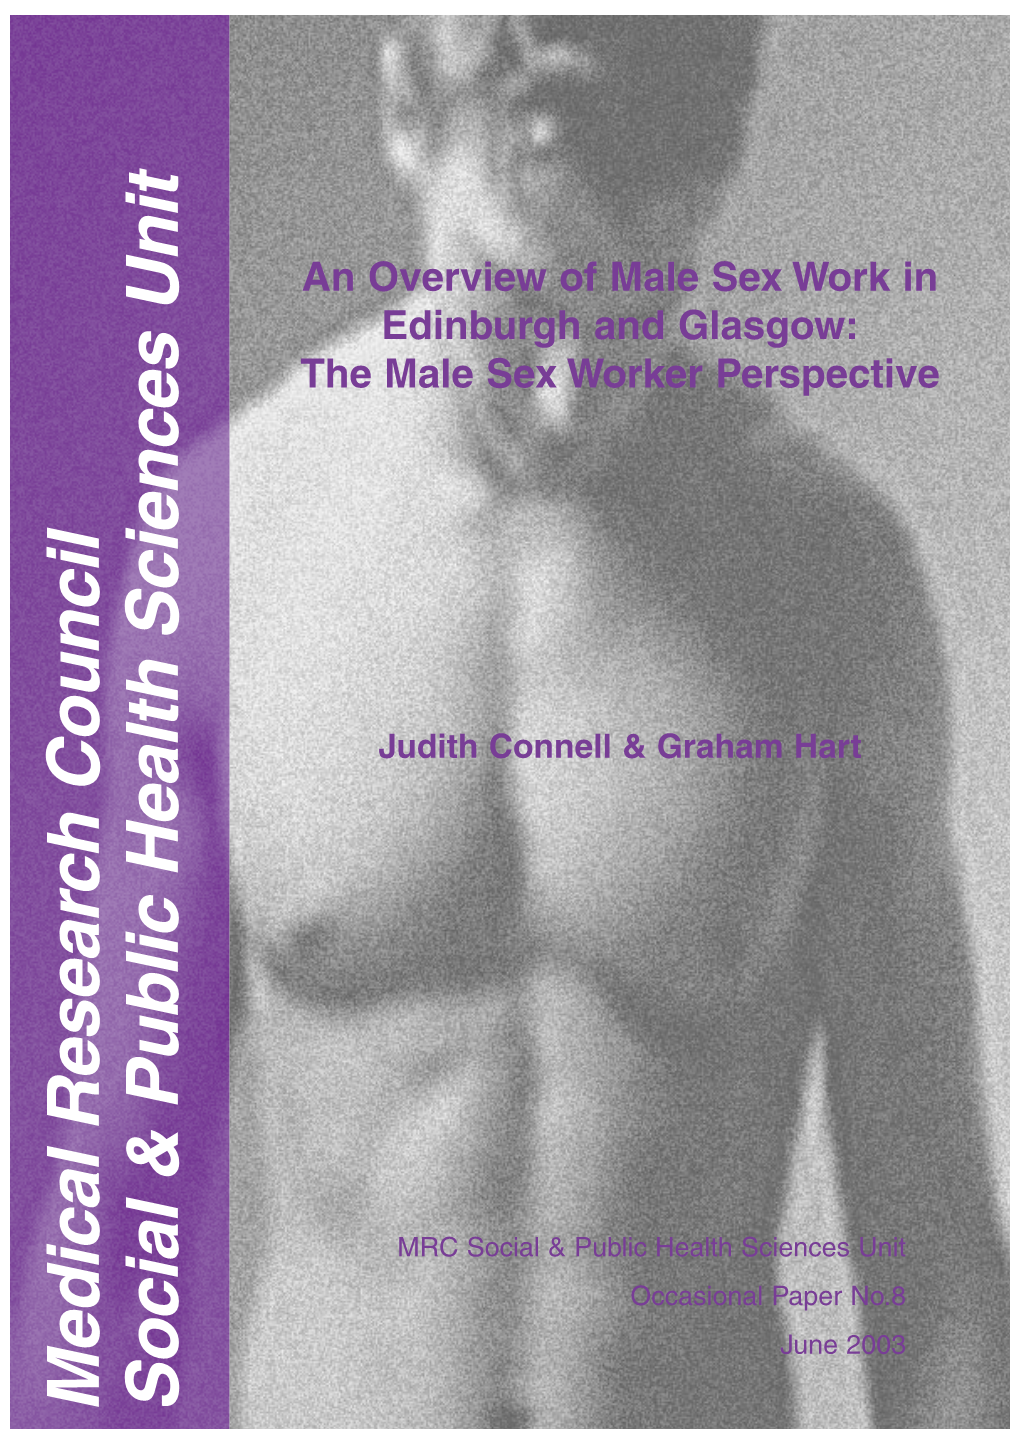 An Overview of Male Sex Work in Edinburgh and Glasgow: the Male Sex Worker Perspective